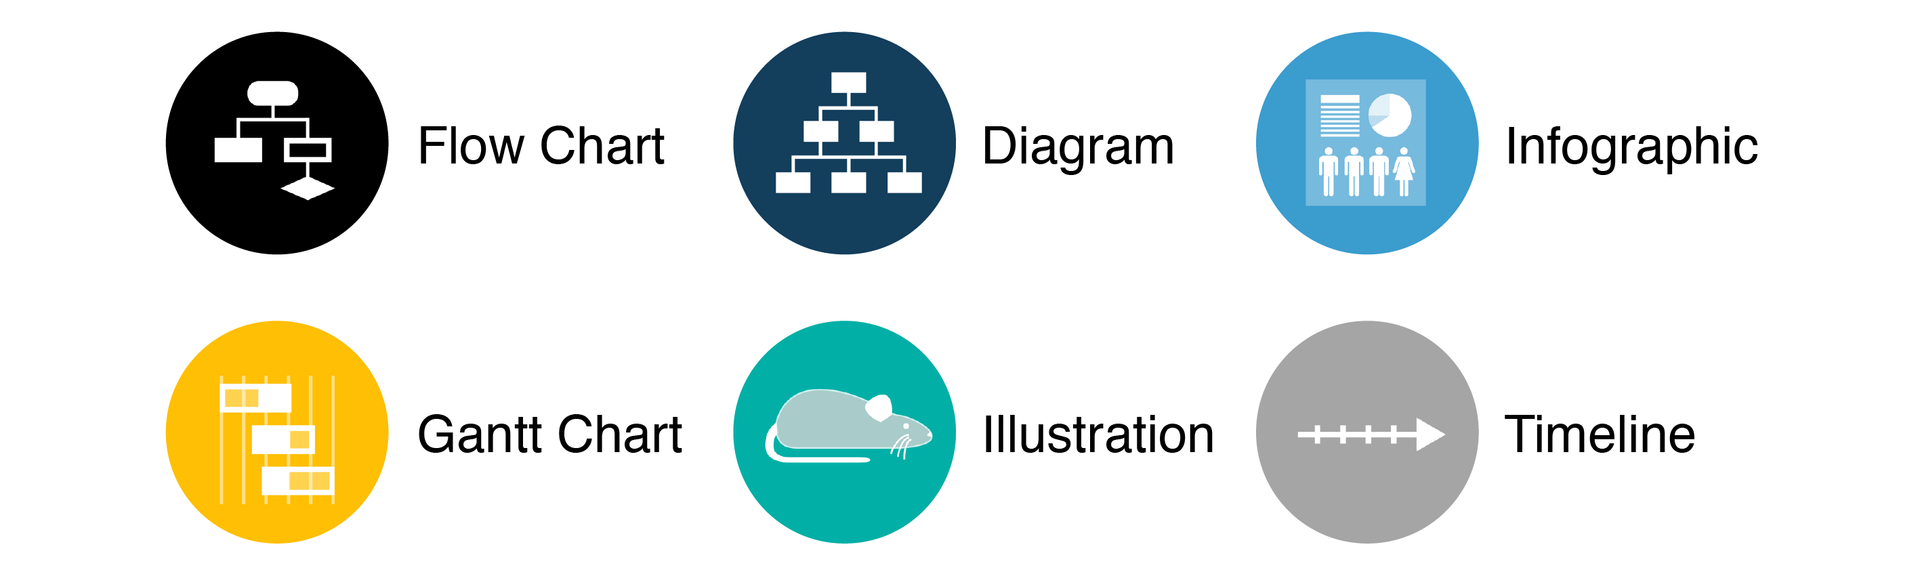 Types of data visualizations that explain a process or method